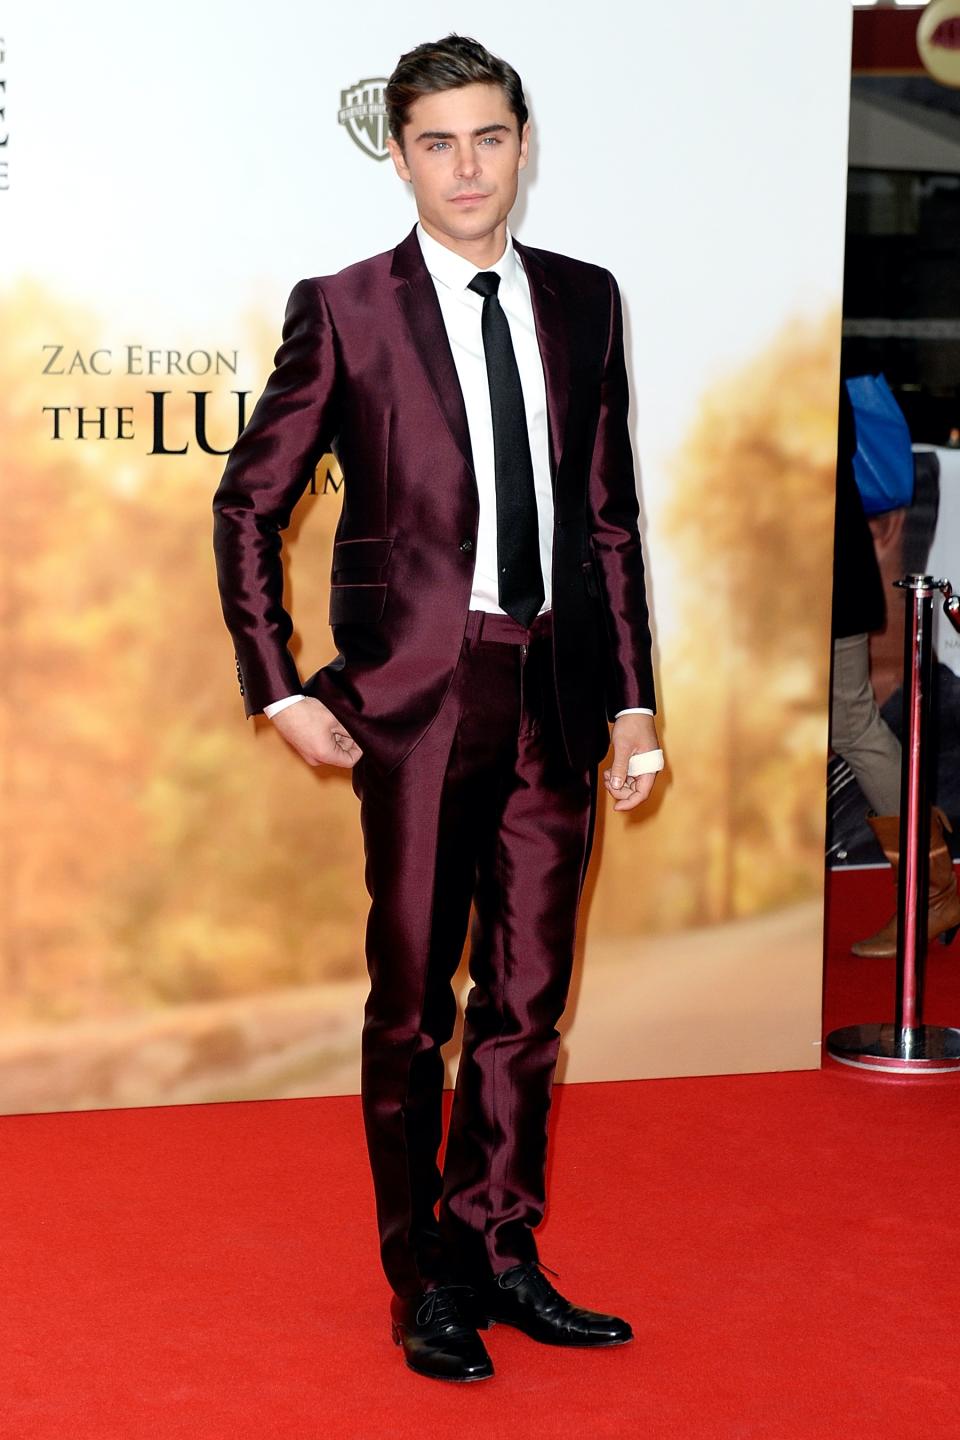 Zac Efron, suits, suiting, loafers, brogues, shoes, footwear, menswear, men's style, celebrity style, celebrity red carpet, red carpet, premiere, The Lucky One, Germany